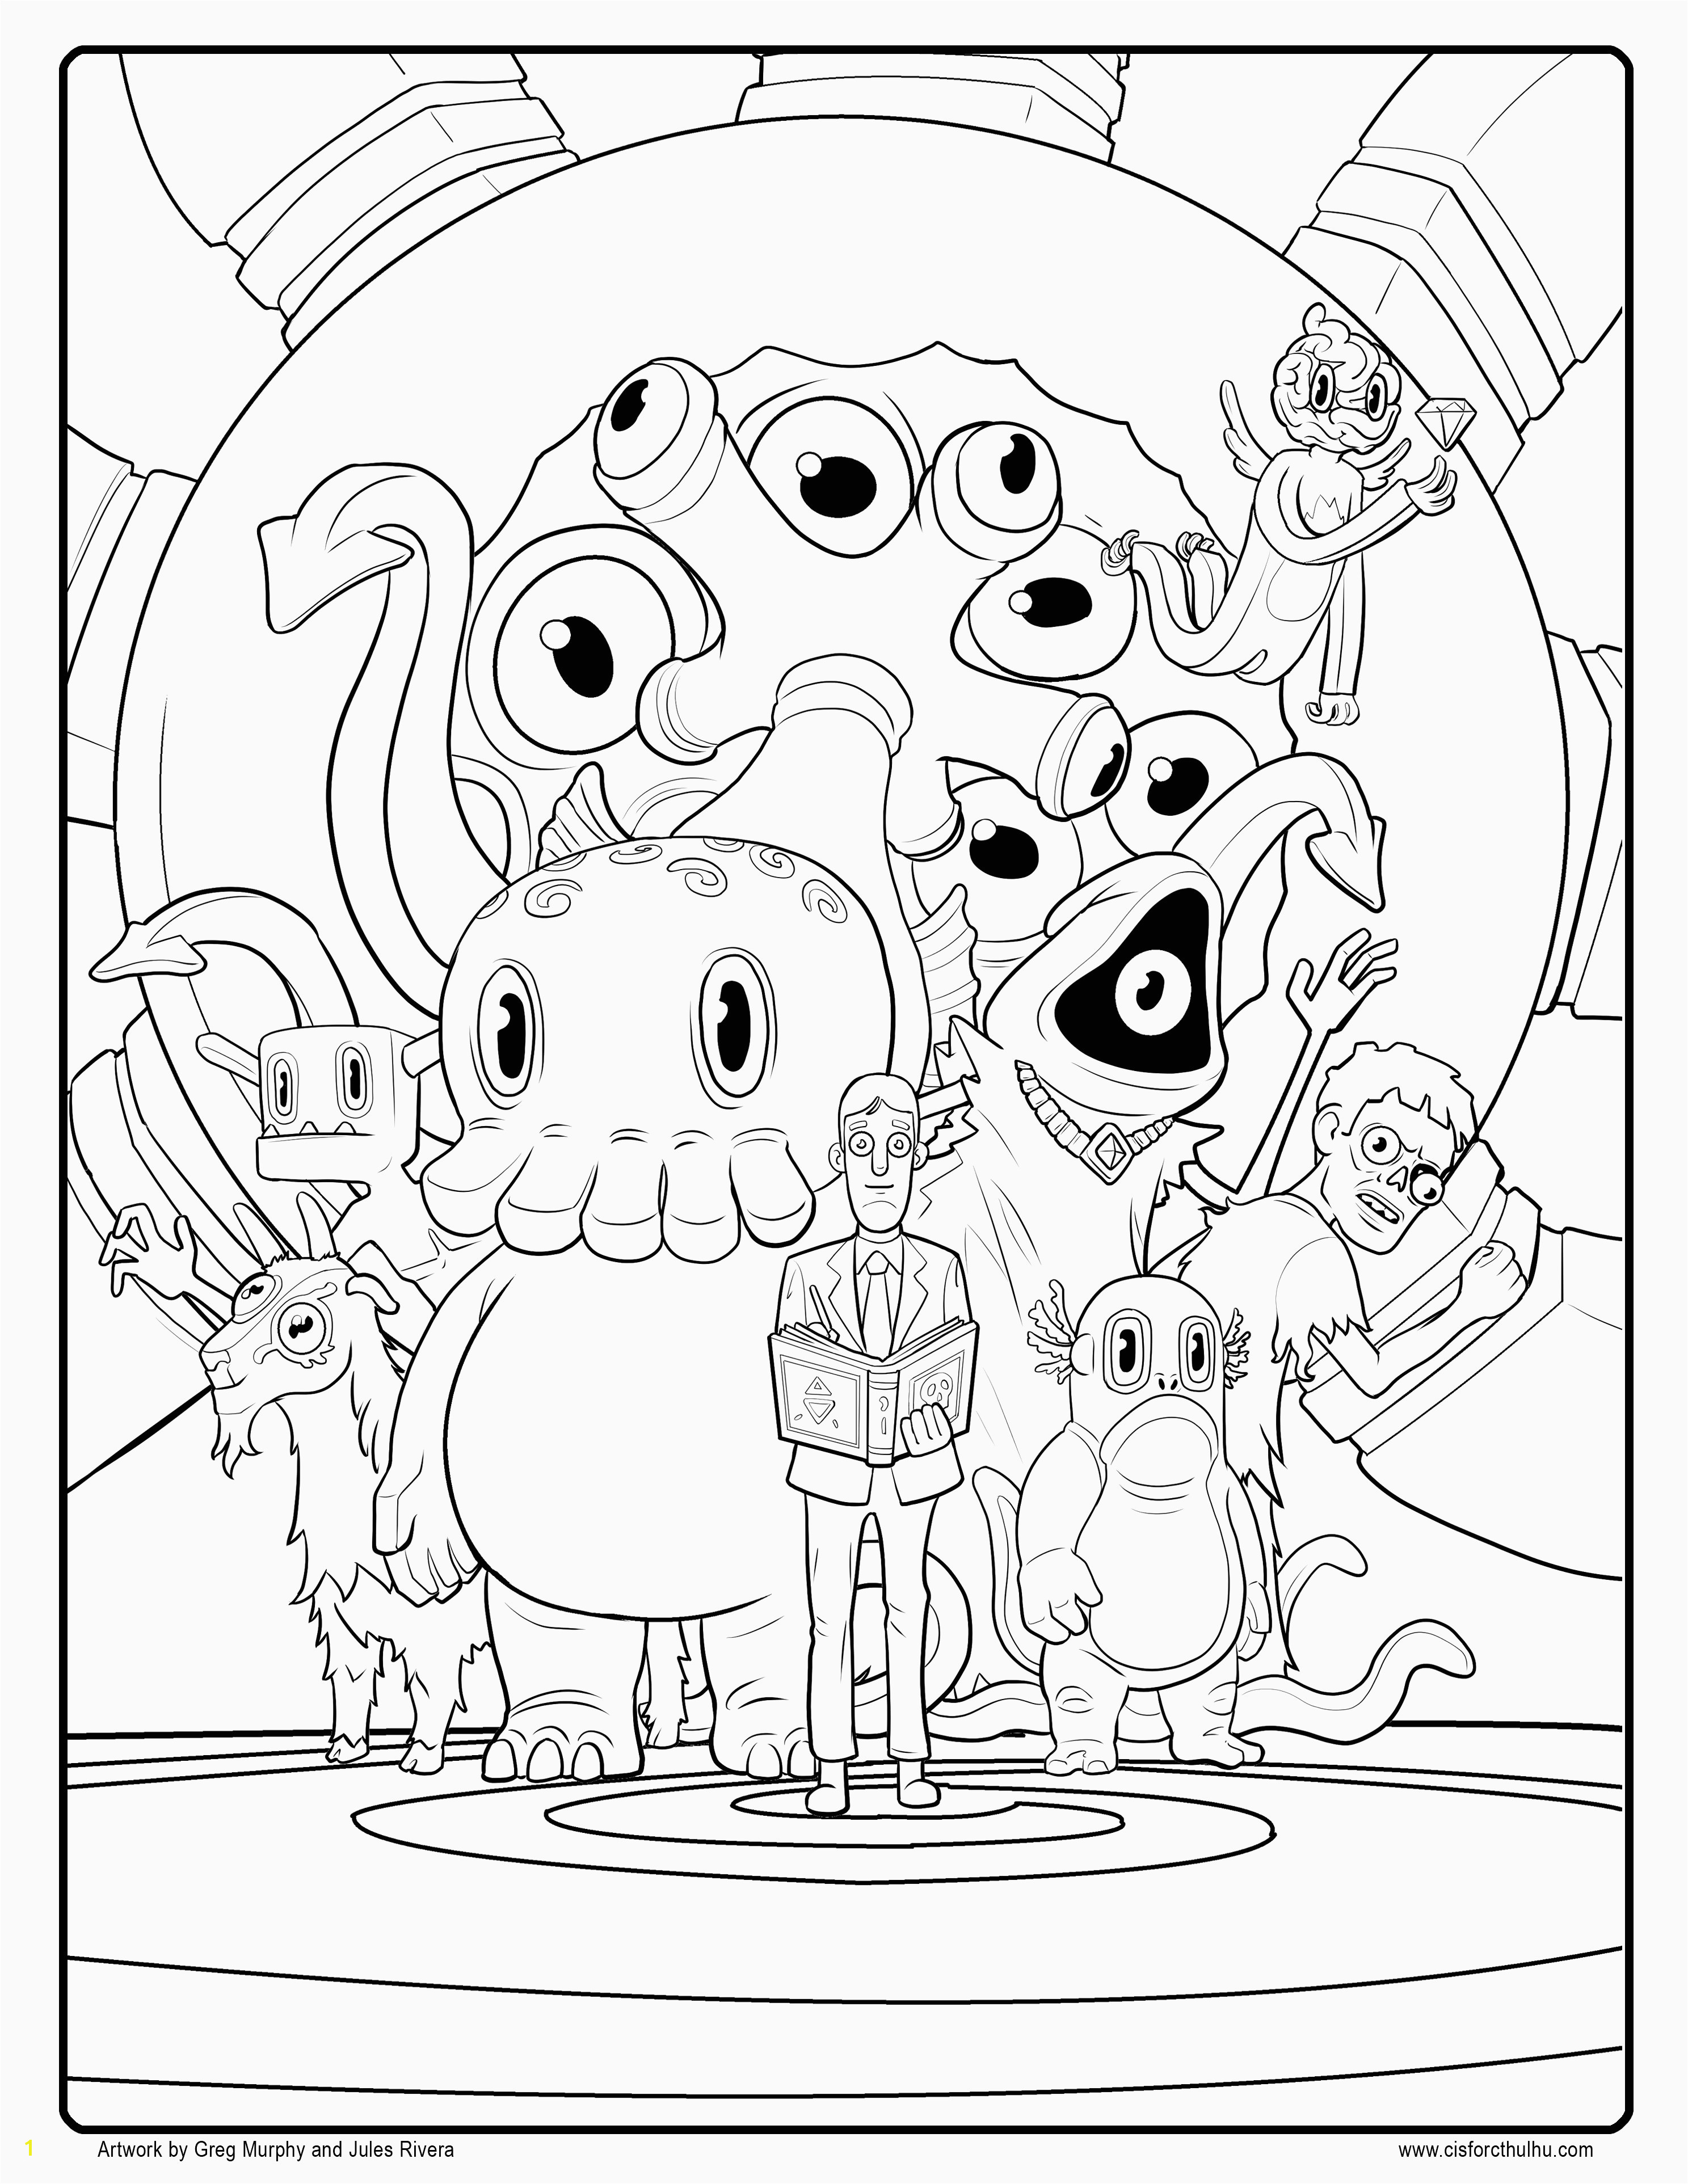 Life Of Pi Coloring Pages Transformer Coloring Pages Sample thephotosync